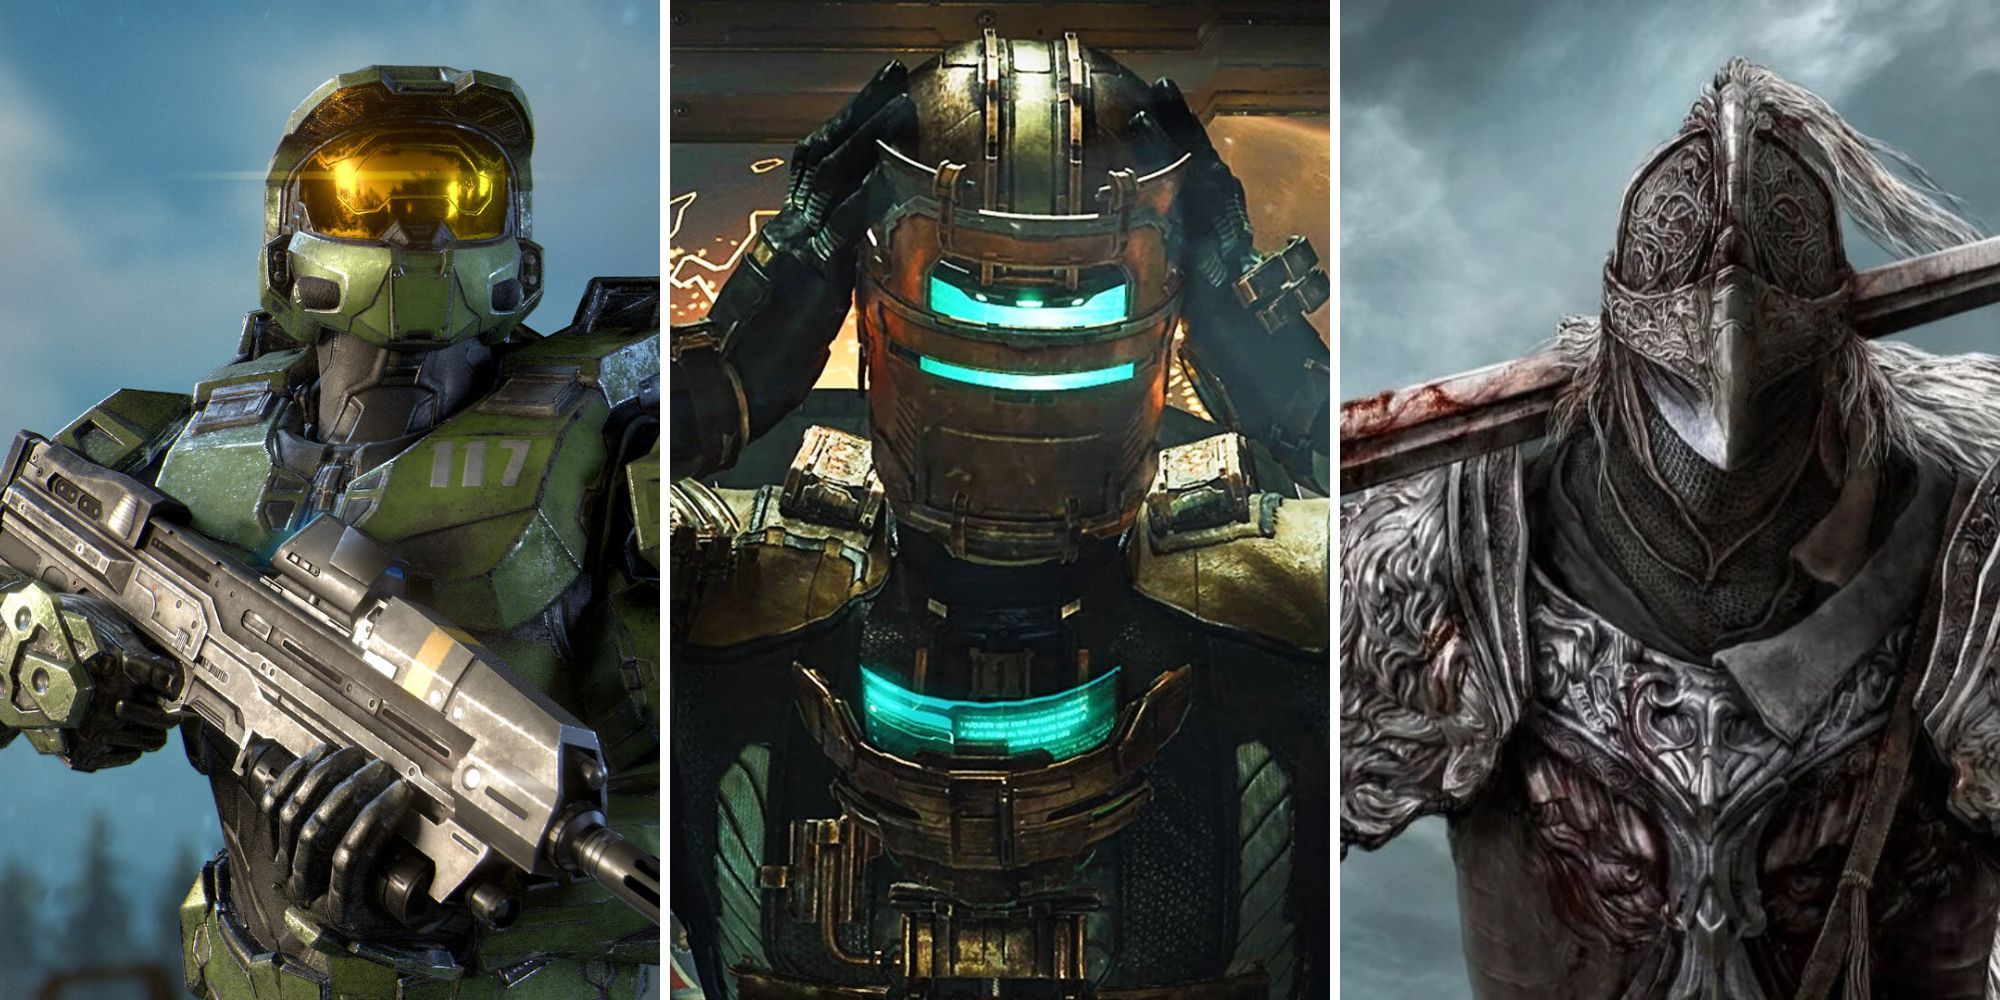 Collage of the Most Iconic Suits of Armor (Halo, Dead Space, Elden Ring)